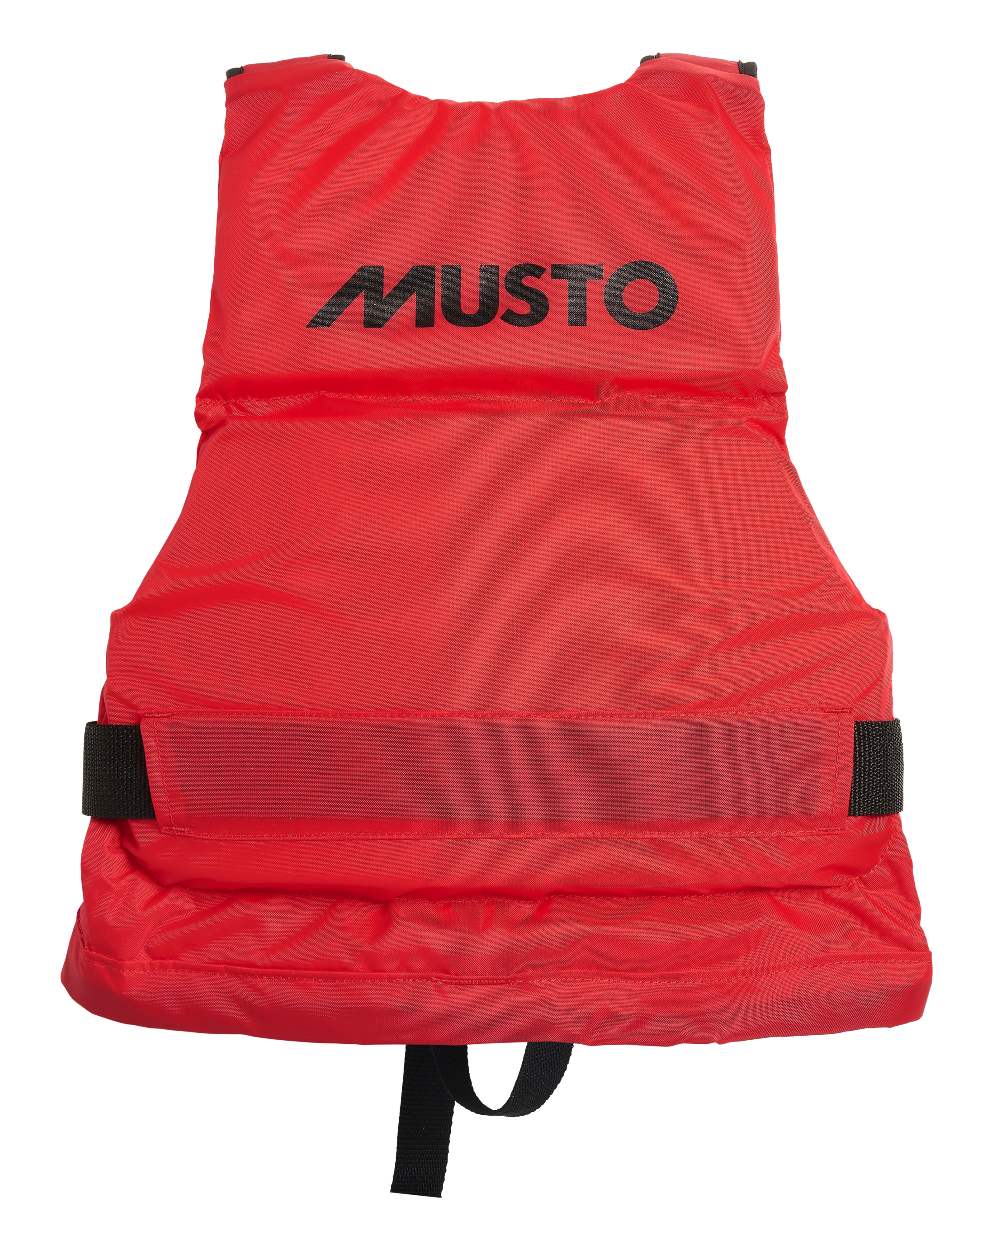 True Red Coloured Musto Junior Buoyancy Aid On A White Background 